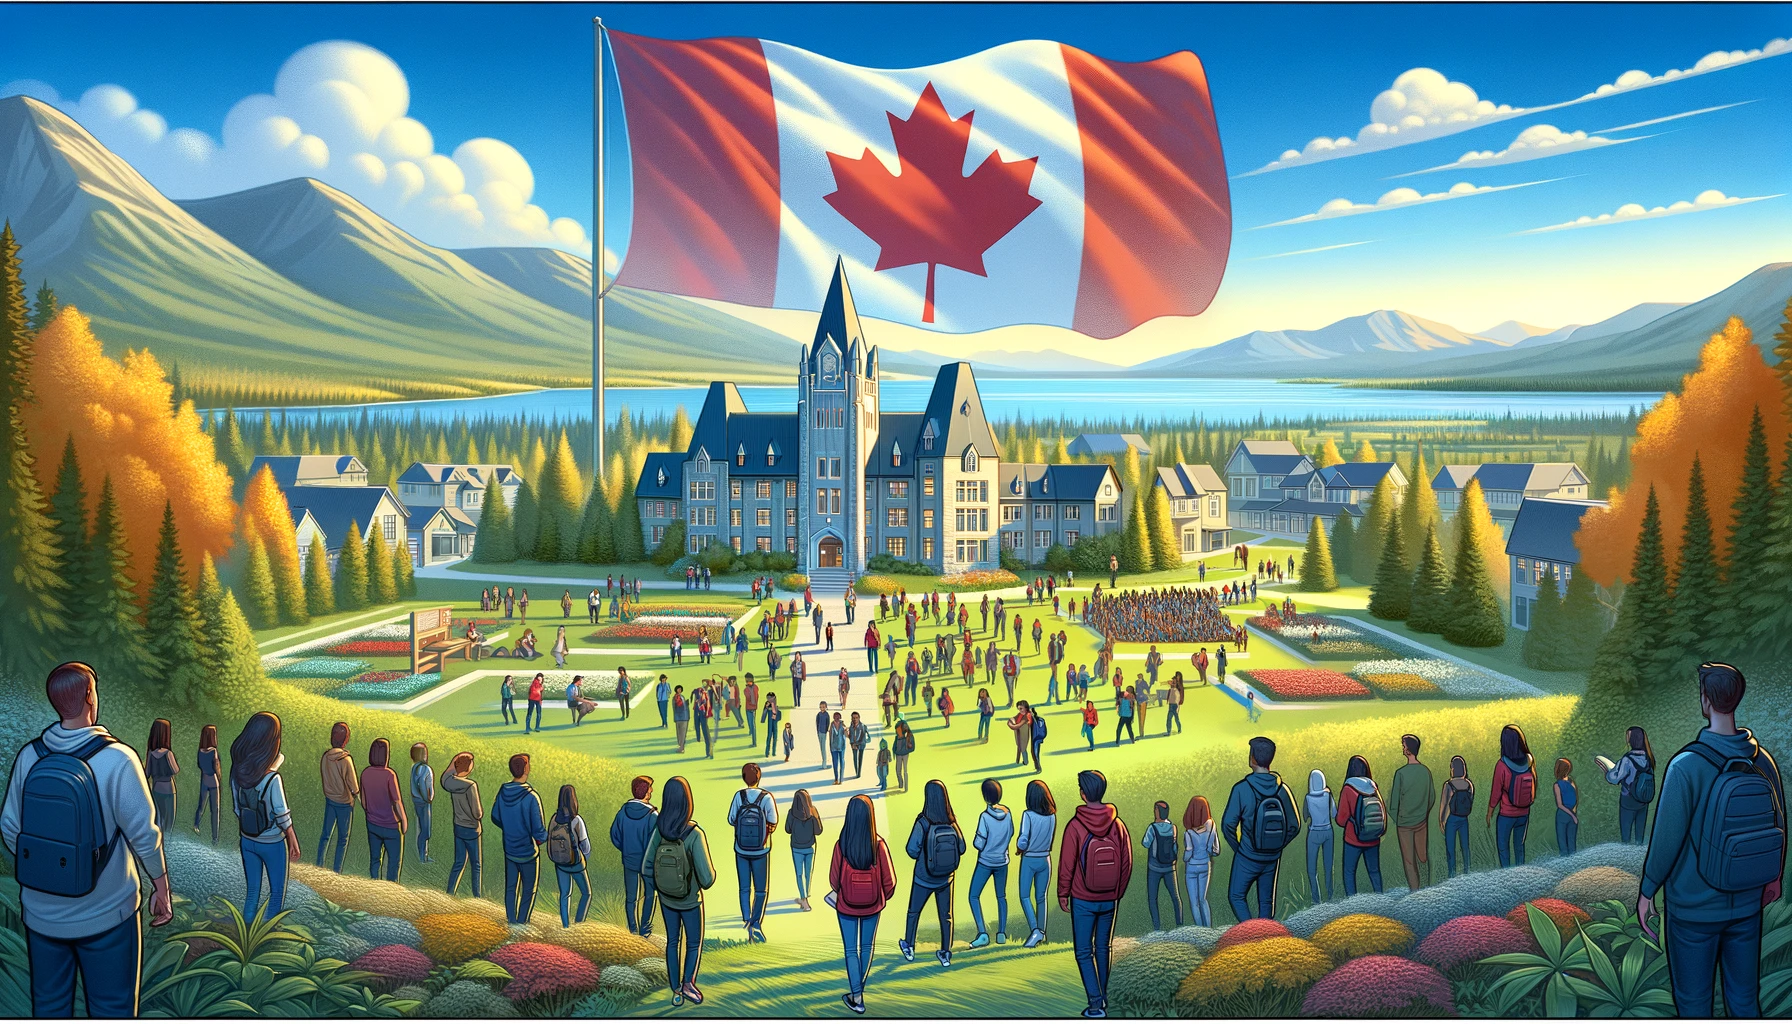 Scenic Canadian educational campus with diverse international students and iconic maple leaves, symbolizing a welcoming and inclusive learning environment.